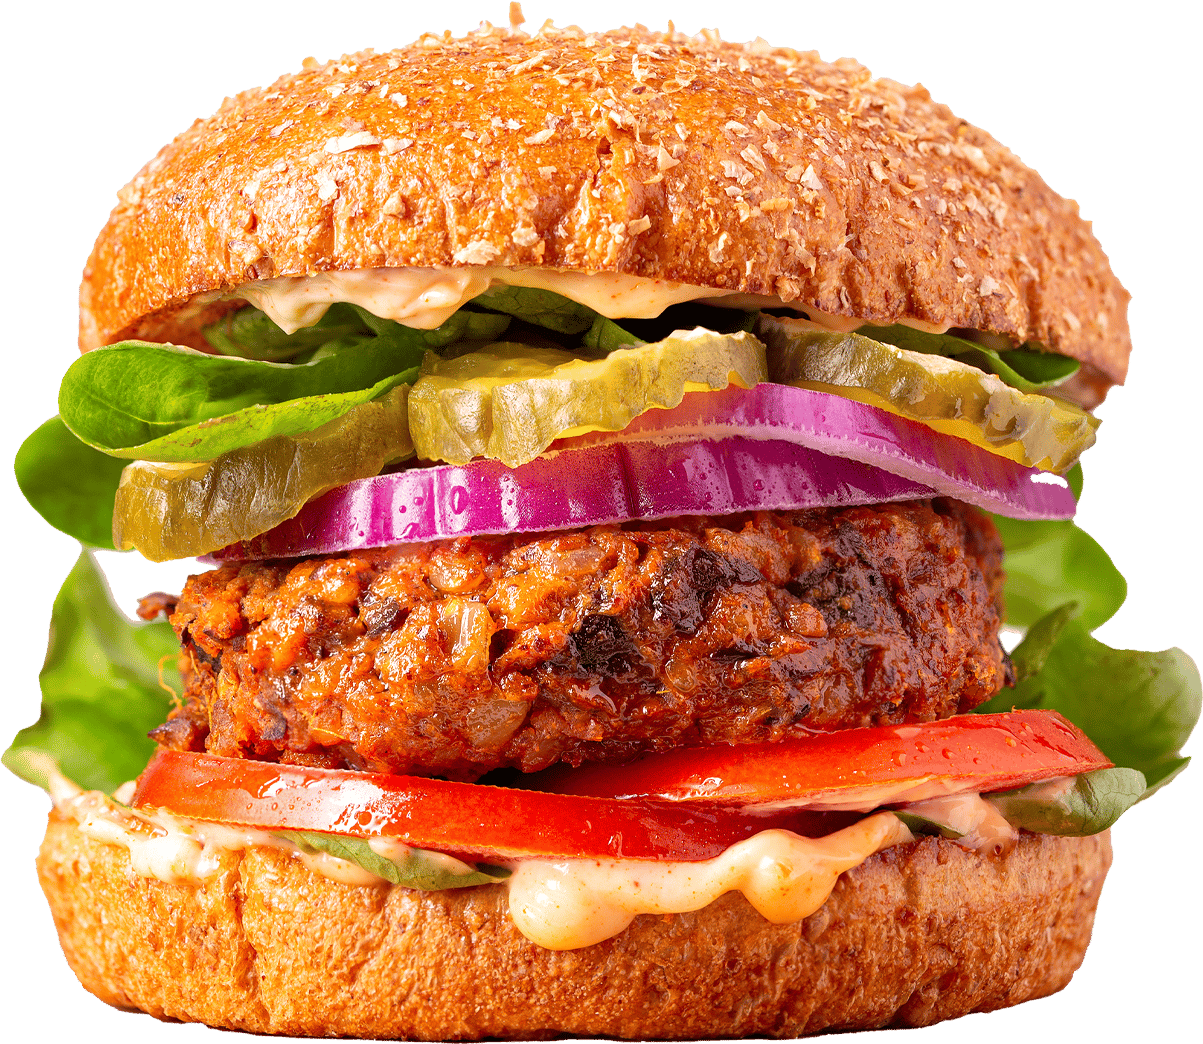 Plant-based burger on a multigrain bun with fresh and delicious toppings